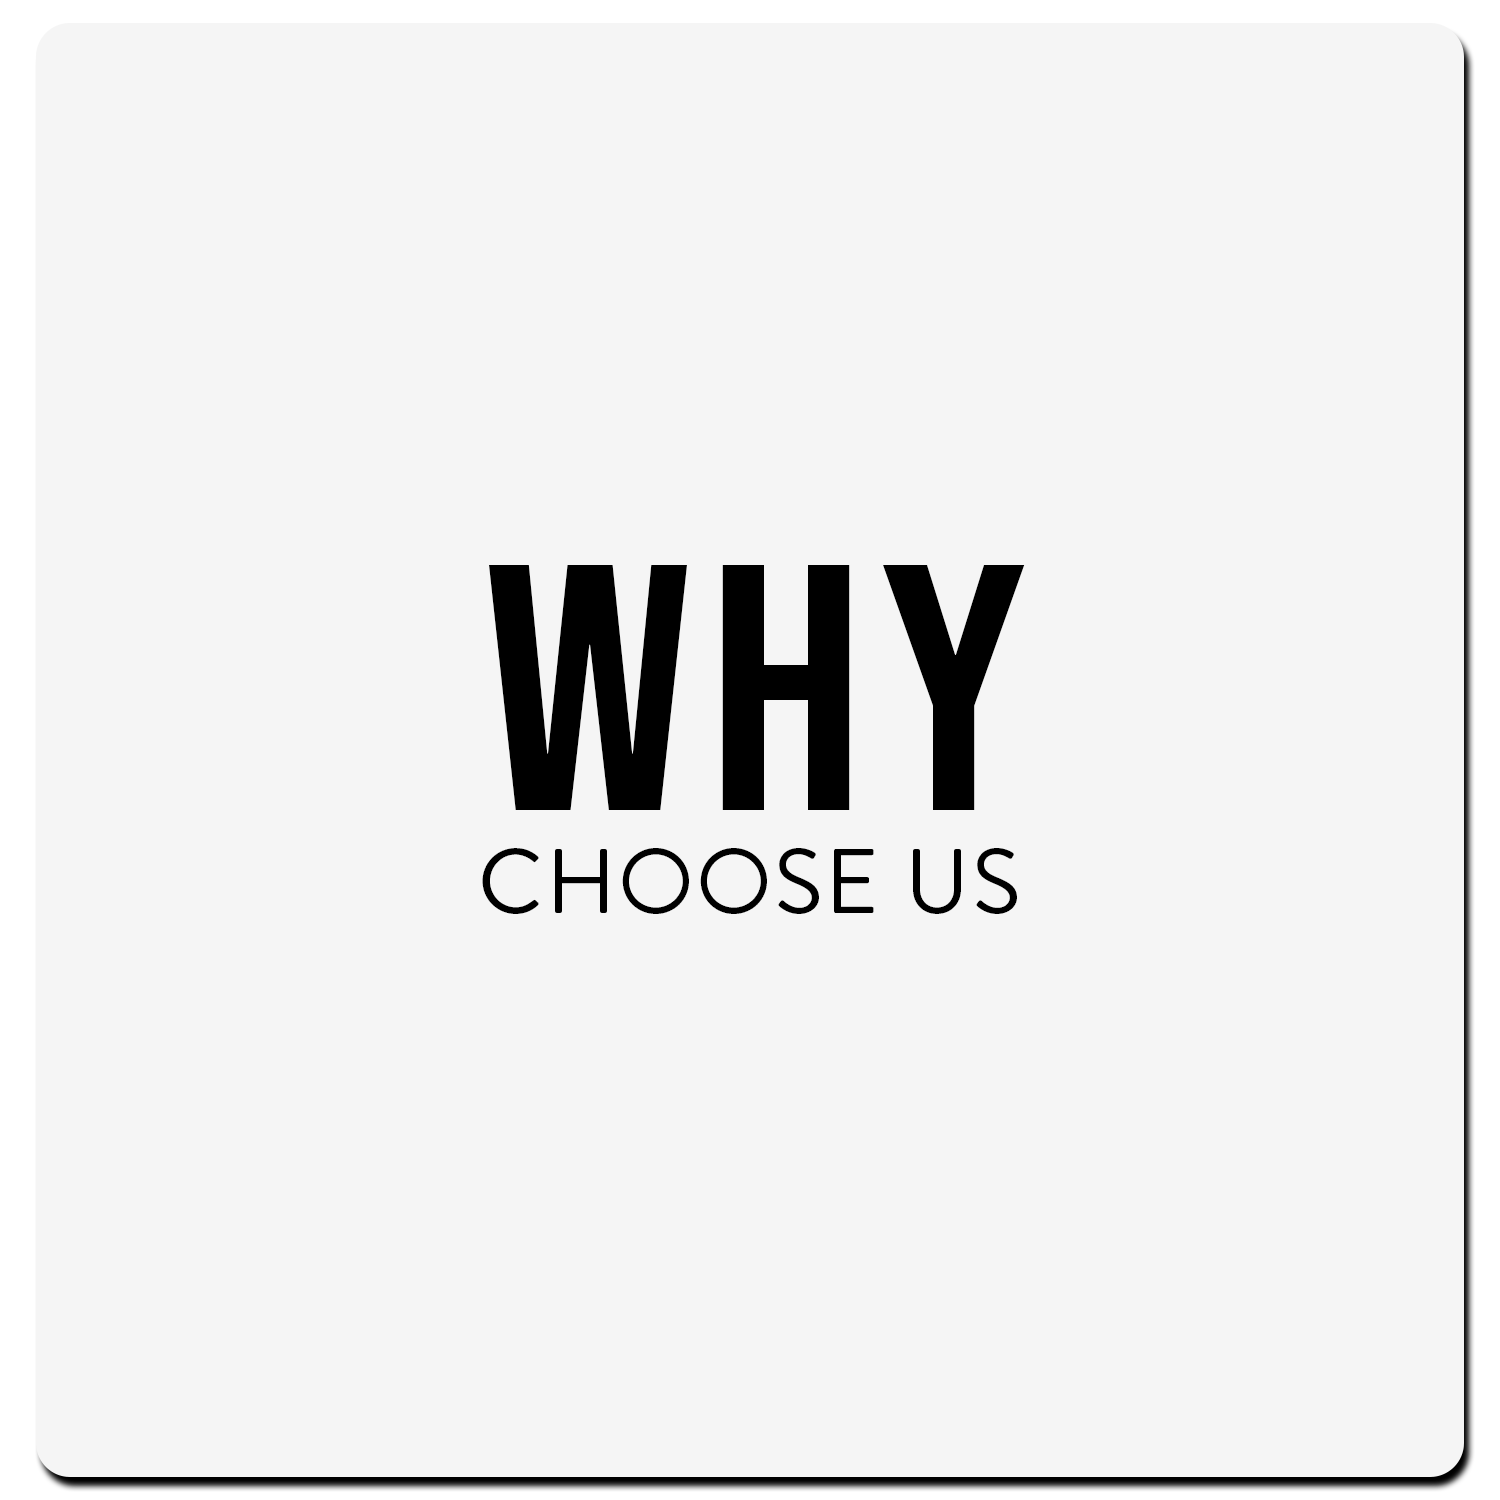 whychooseusicon.png